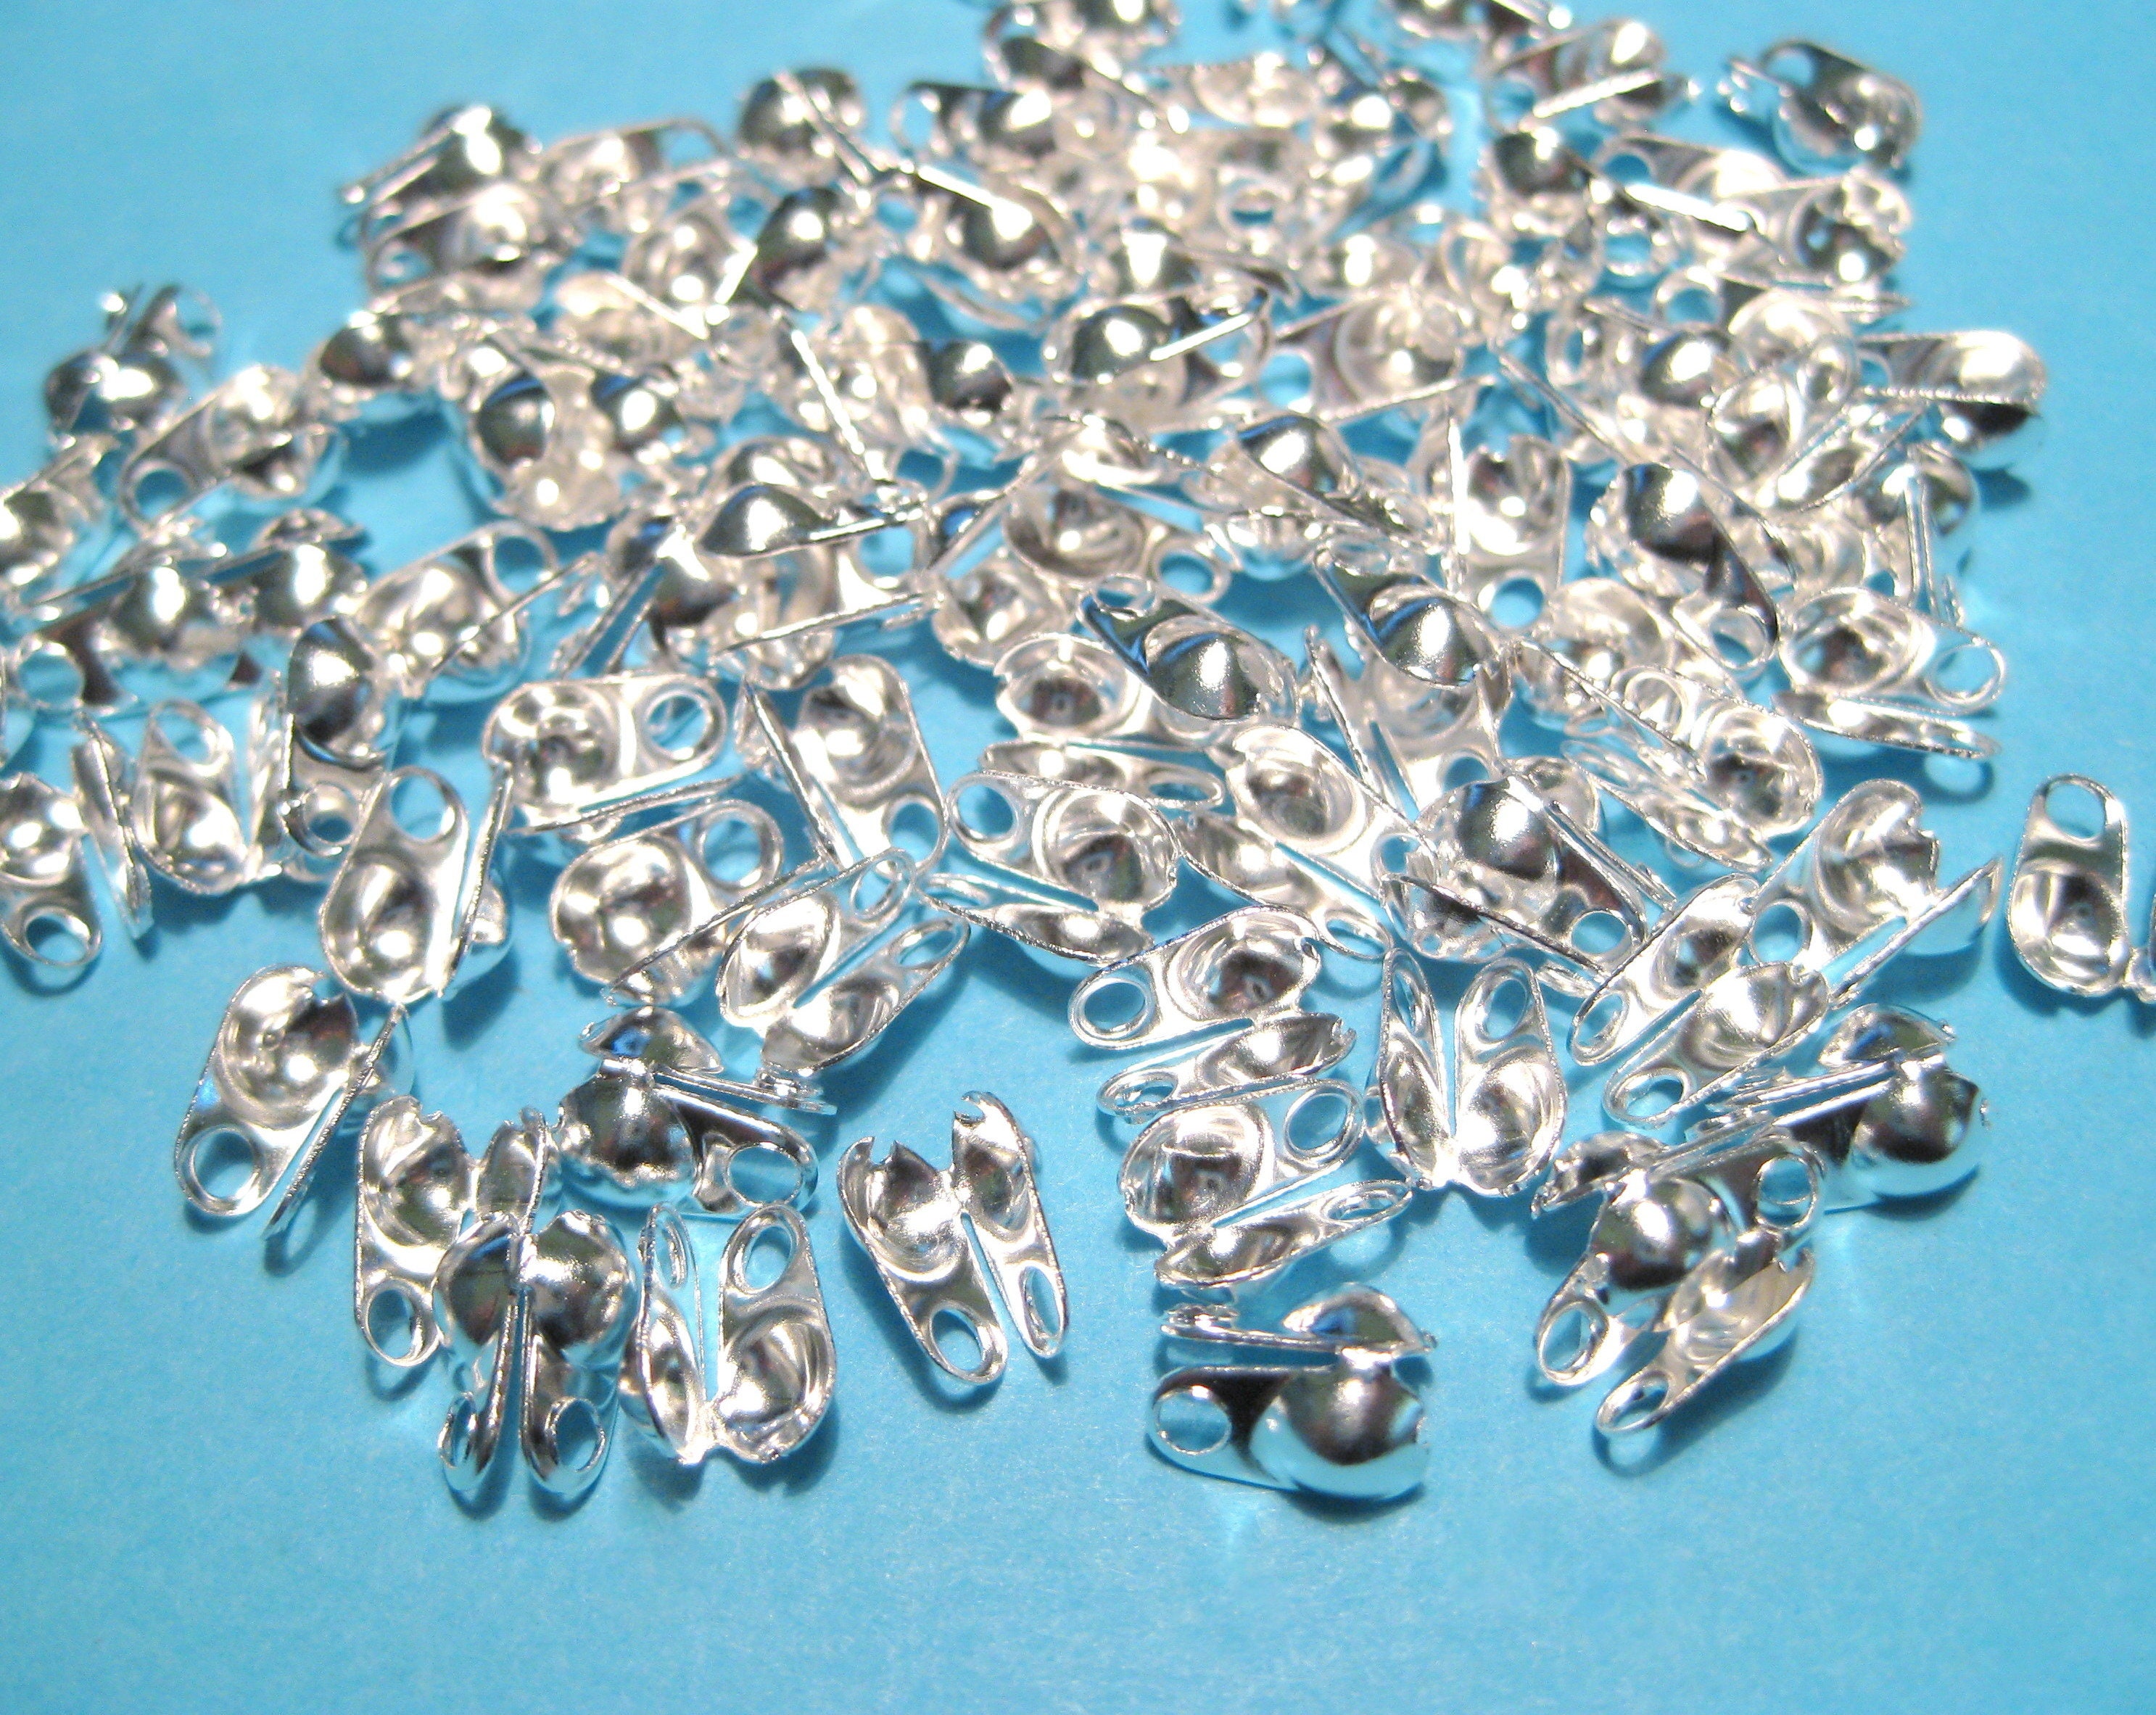 50 Pcs of STAINLESS Steel Ball Chain Connectors Clasps for 2.4mm Ball Chain  Crimp Type 